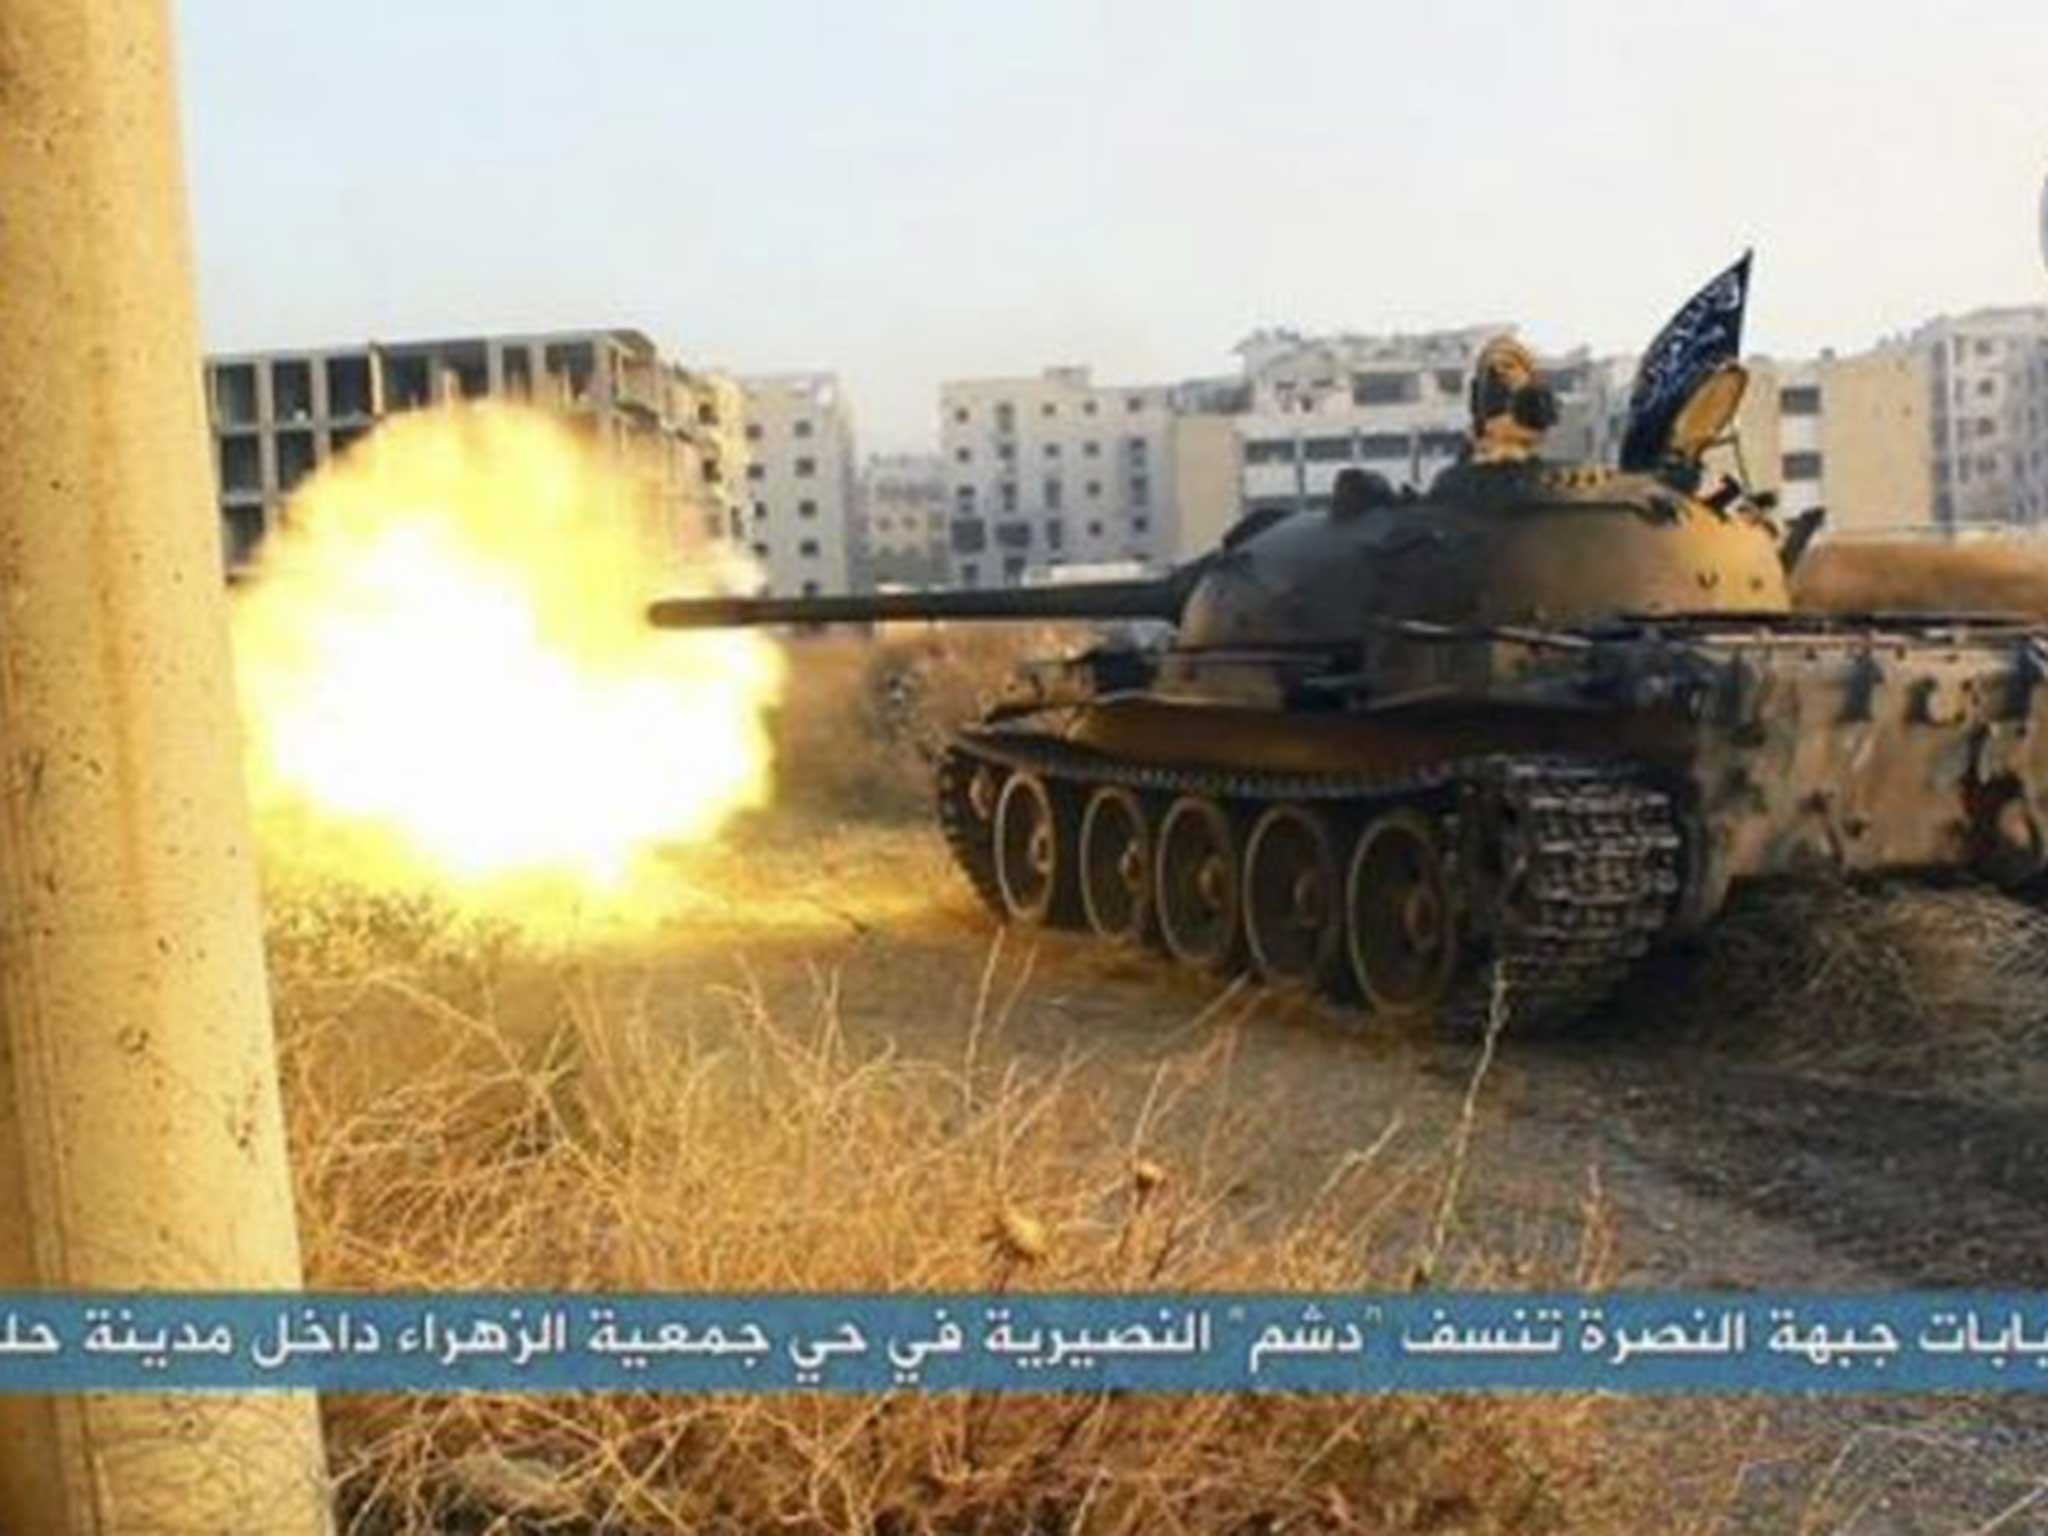 An al-Nusra Front tank fires during their clashes against the Syrian government forces, taken from Twitter account affiliated with the group